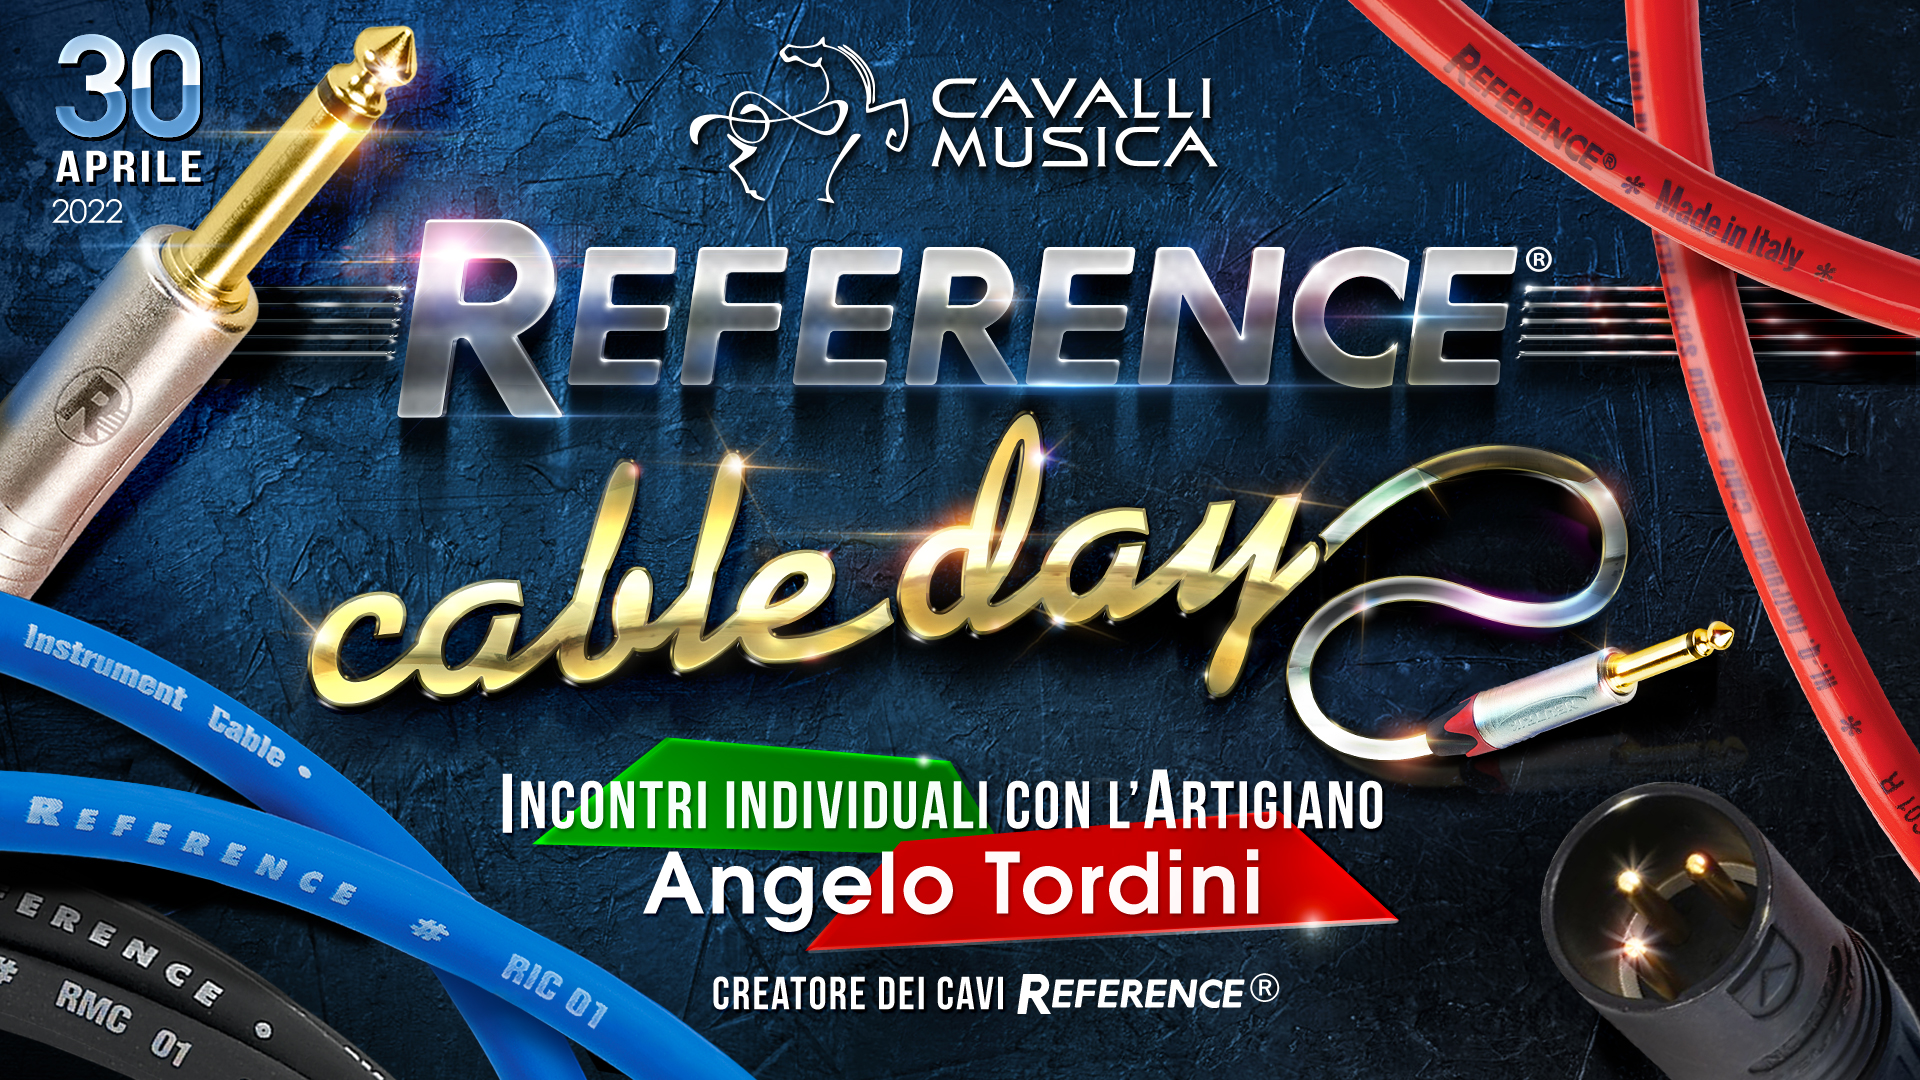 Reference® Cable Day @ Cavalli Musica